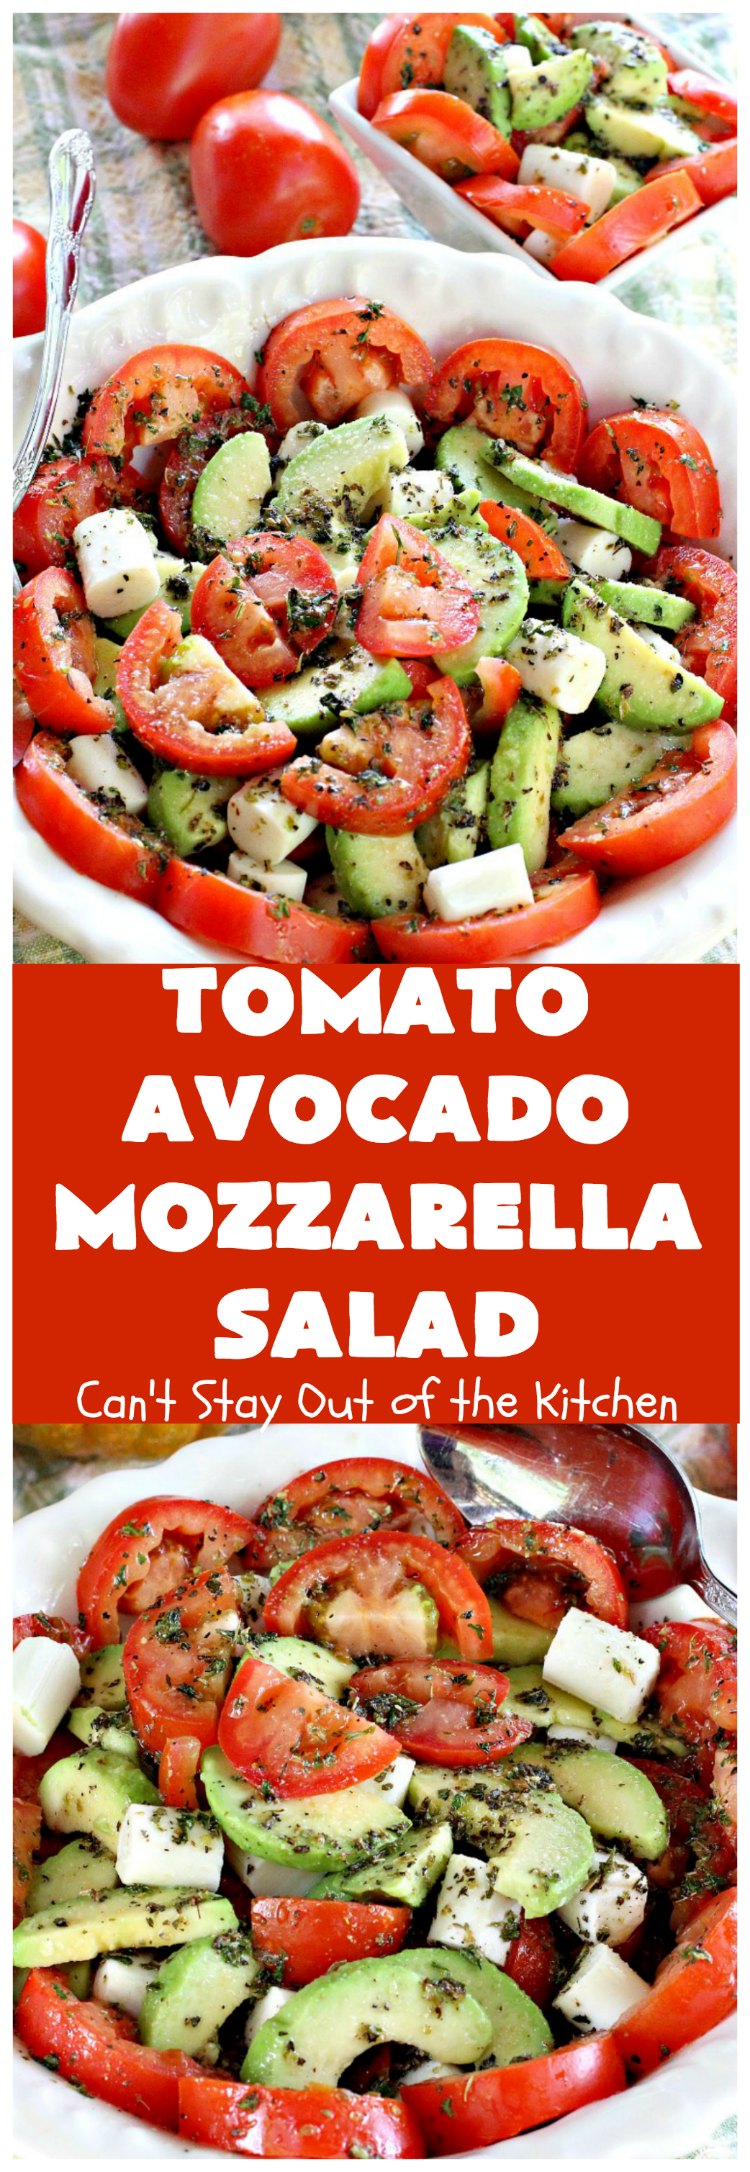 Tomato Avocado Mozzarella Salad | Can't Stay Out of the Kitchen | this is one of the best #salads ever! It's so easy to make & it's perfect for #holidays like #Easter #MothersDay or #FathersDay. It's also great for summer #BBQs & potlucks. #glutenfree #tomatoes #avocados #Mozzarella